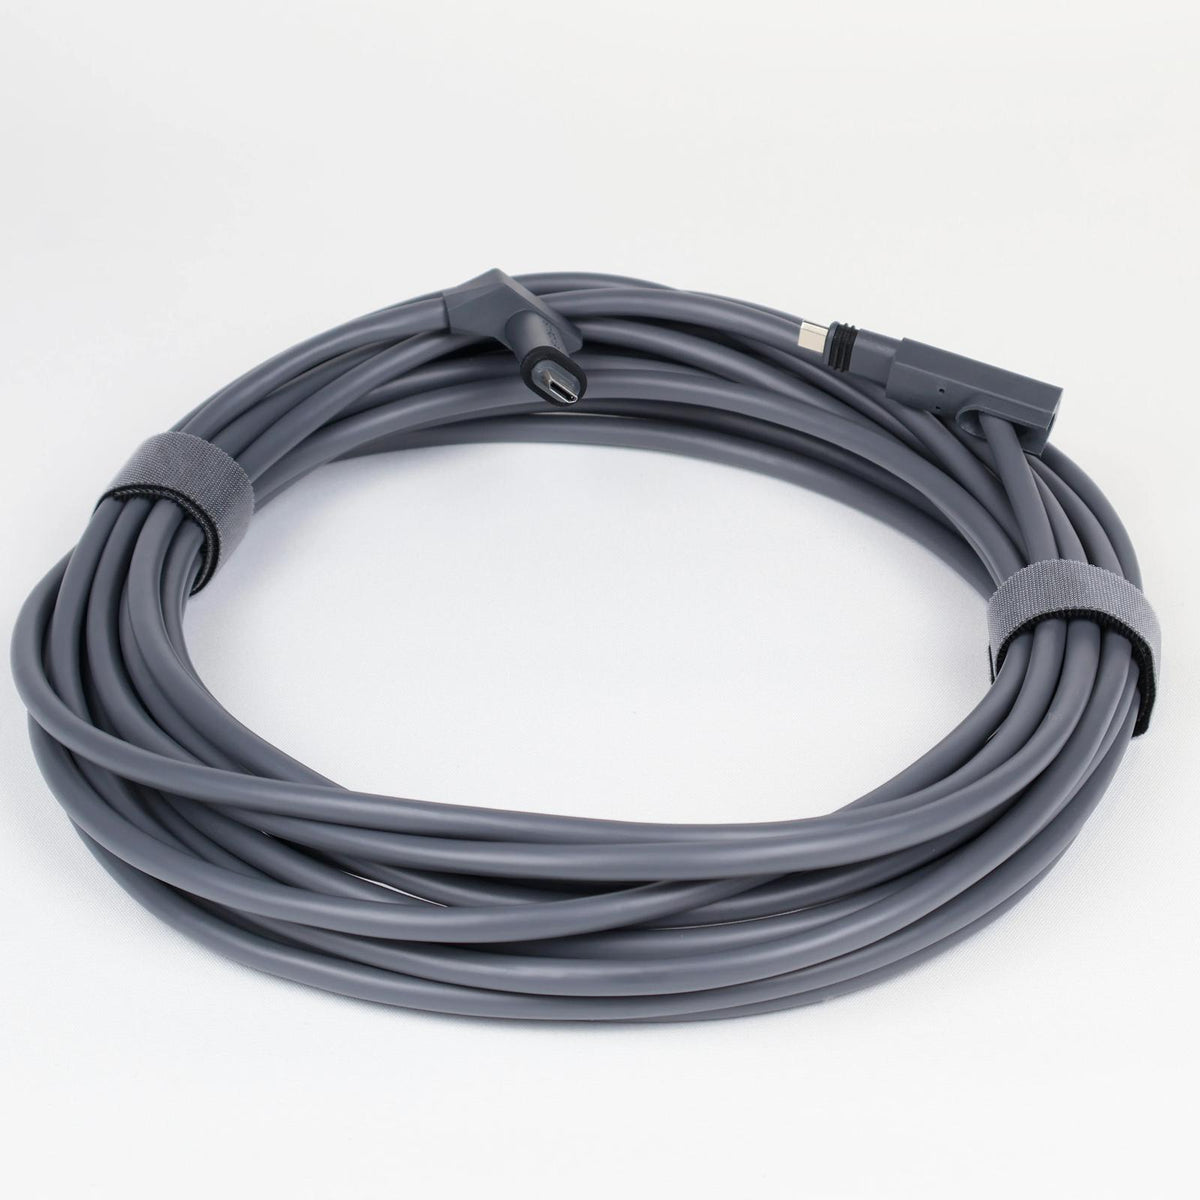 Starlink SPX Cable - 5m (16ft) - EVAAM